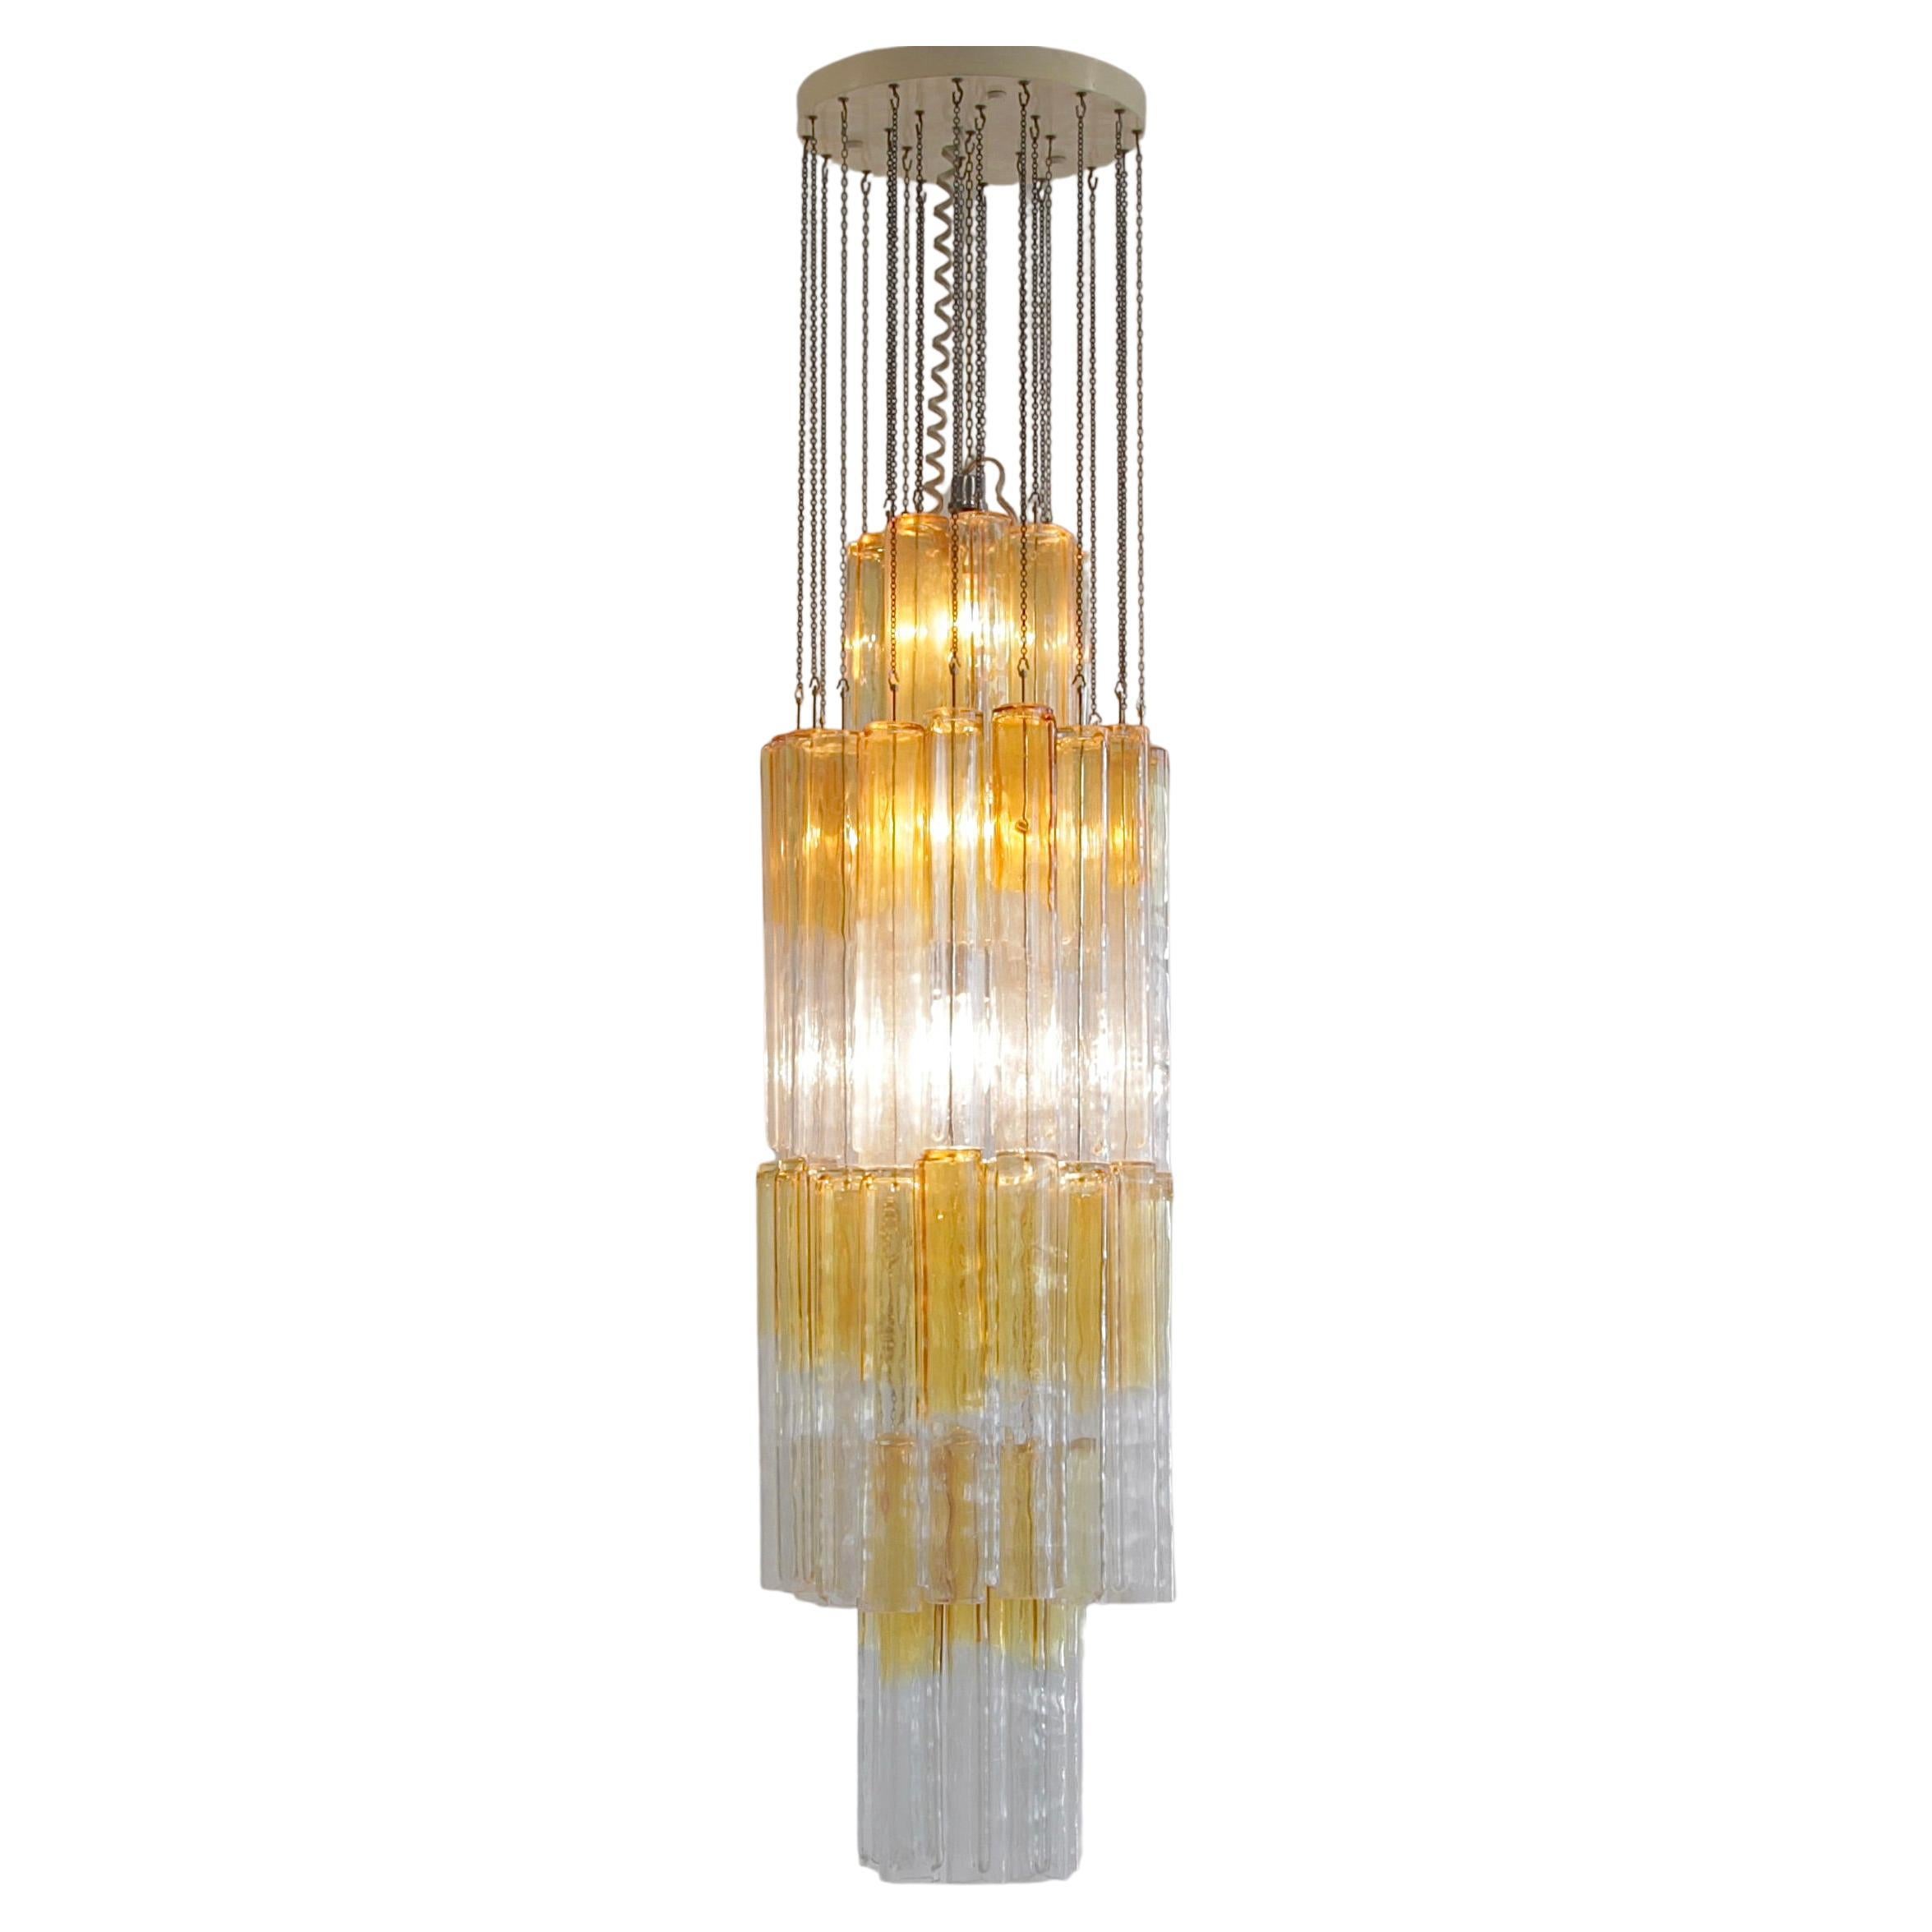 Large Original 'CALZA' Glass Chandelier by Venini, Italy 1960's For Sale